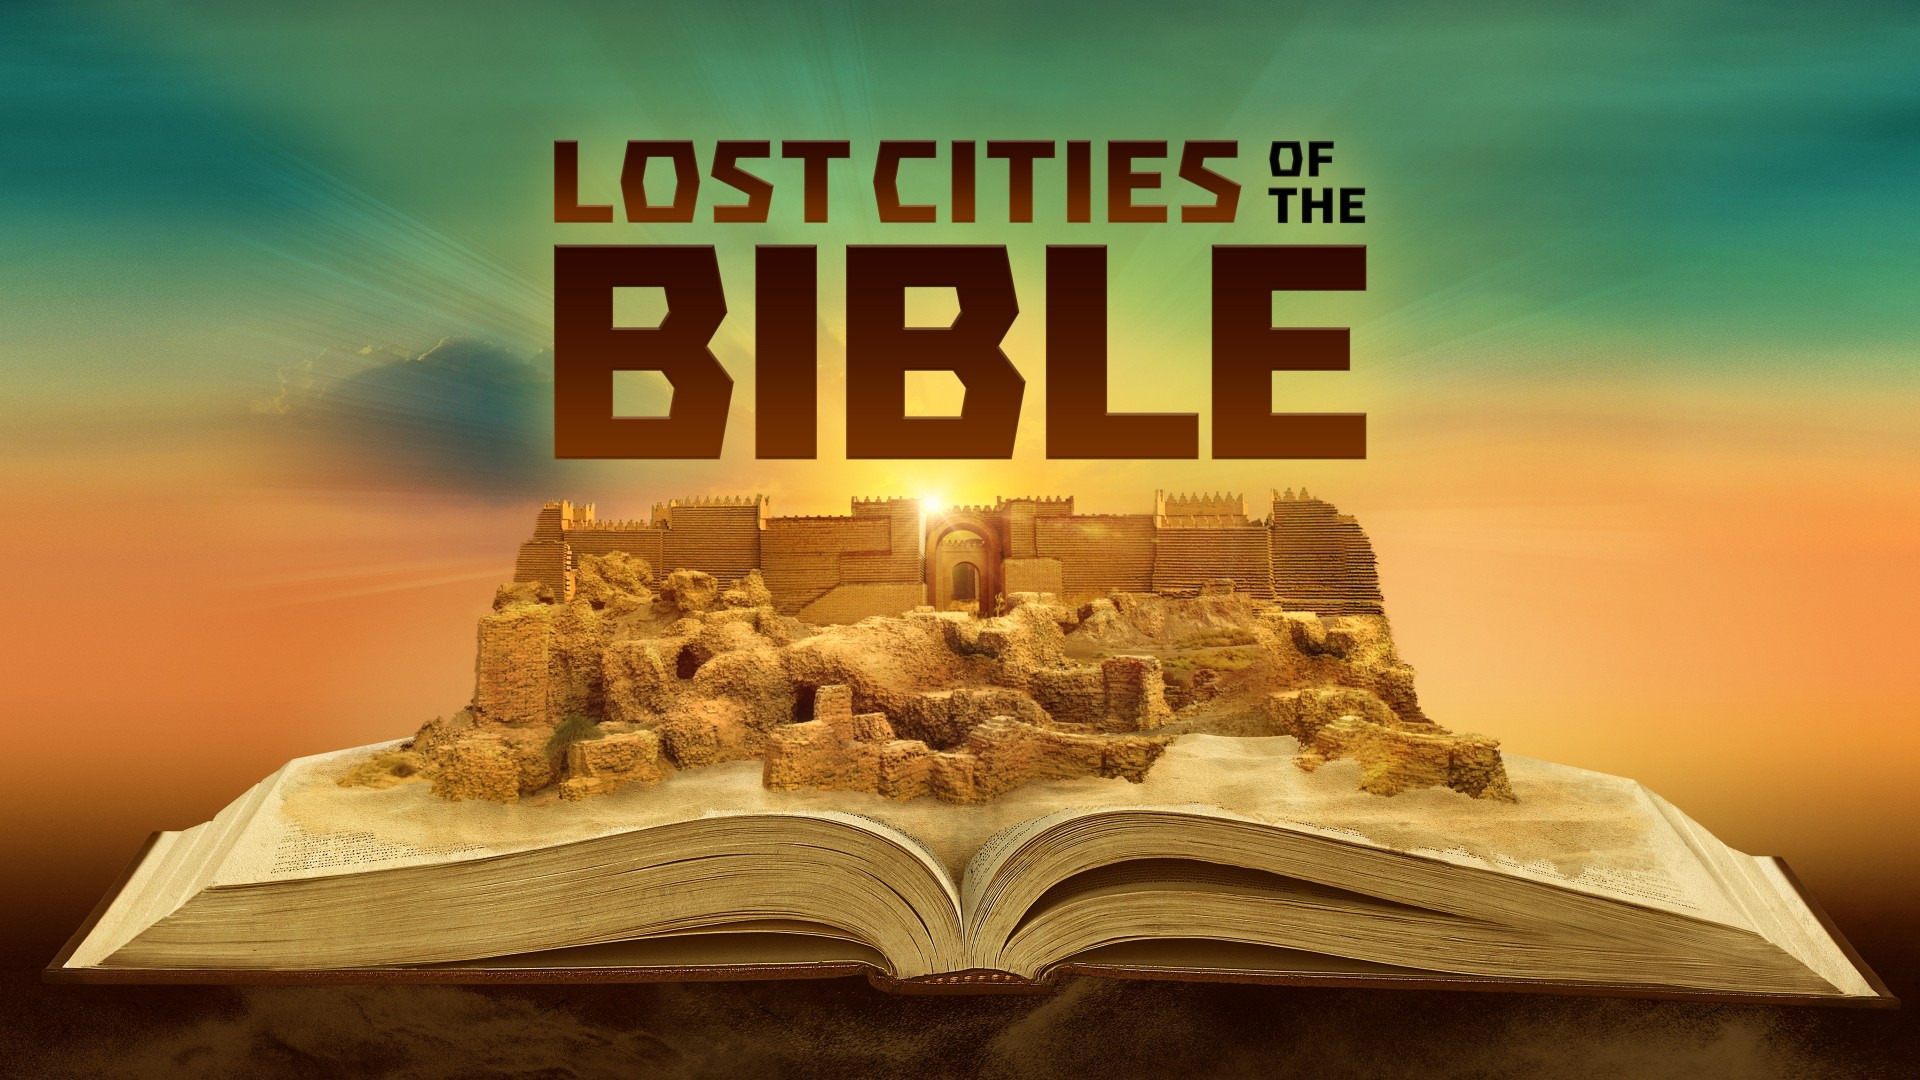 Show Lost Cities of the Bible